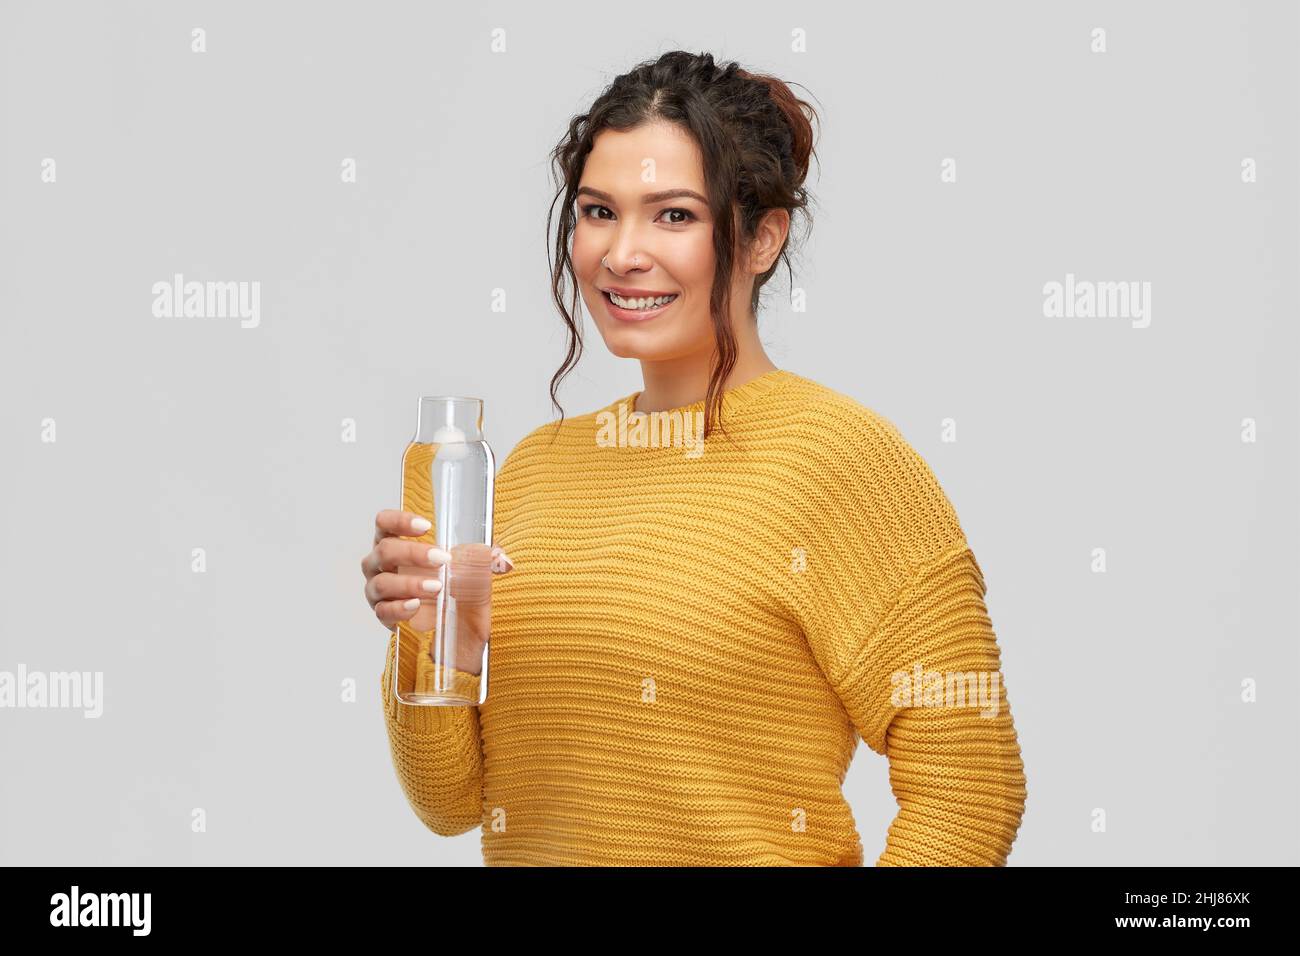 smiling young woman with water in glass bottle Stock Photo